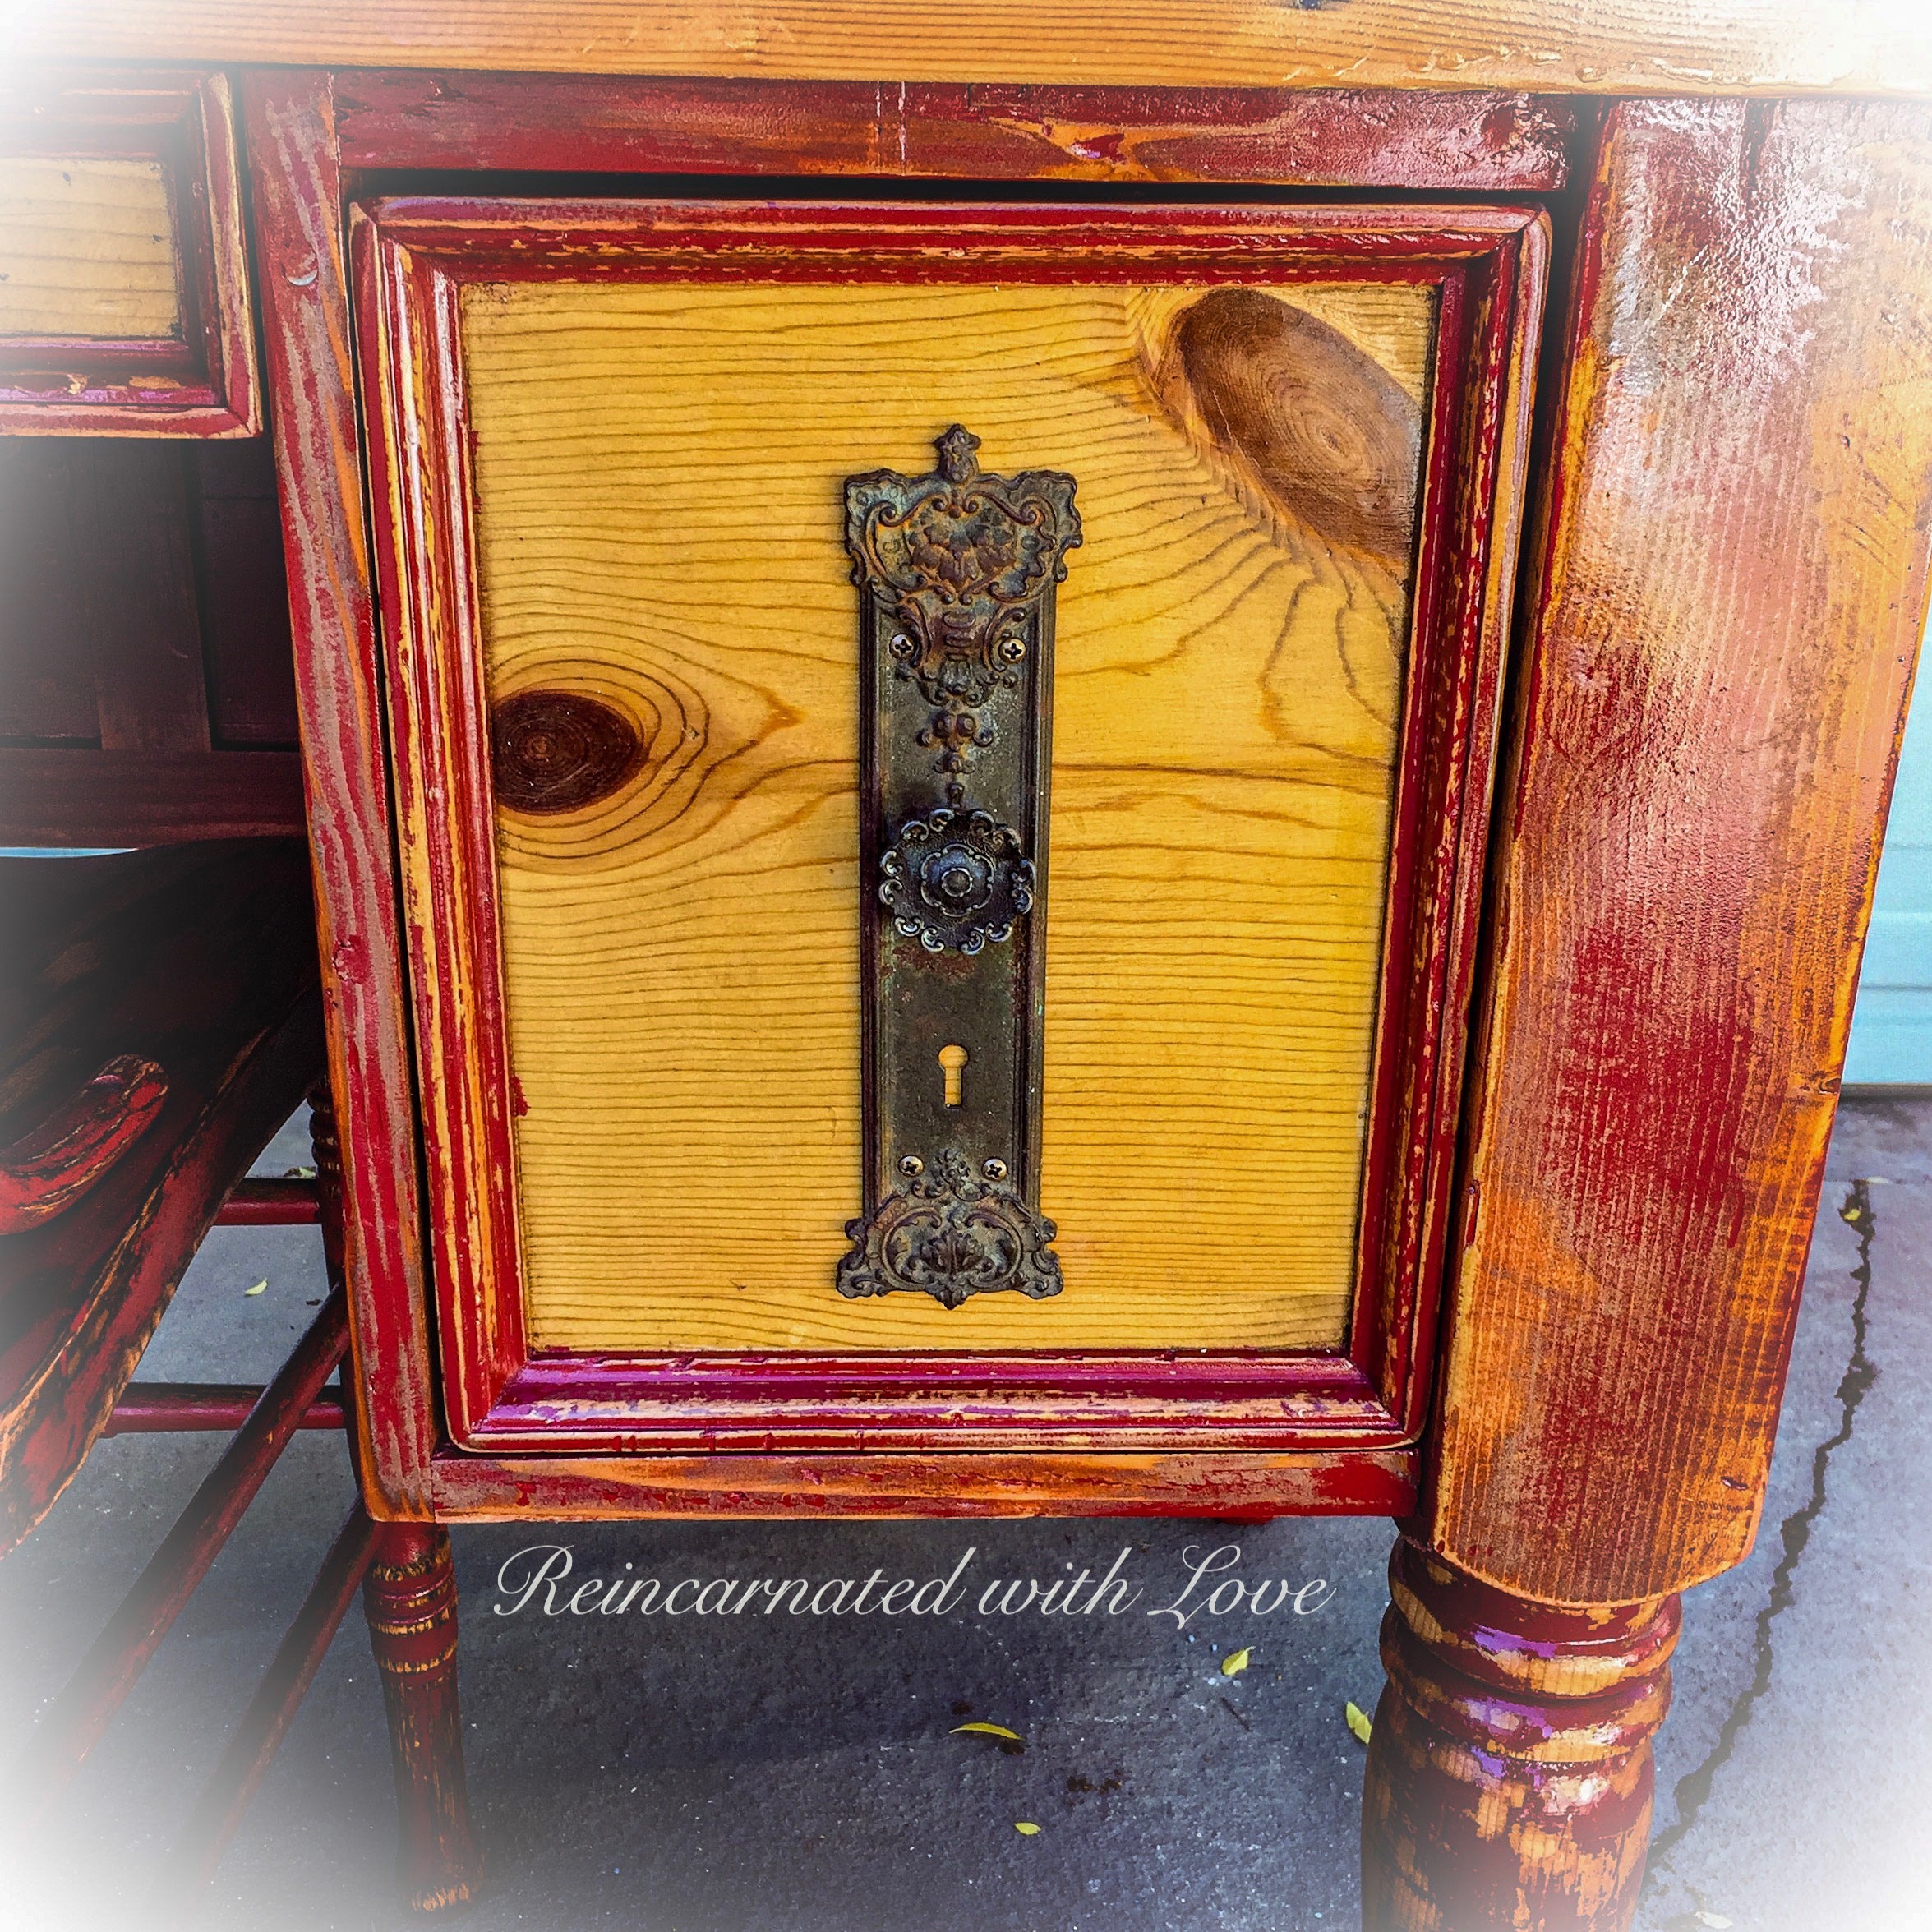 Antique hardware on the drawer face of a reclaimed wood desk, painted in distressed red & stained wood. 